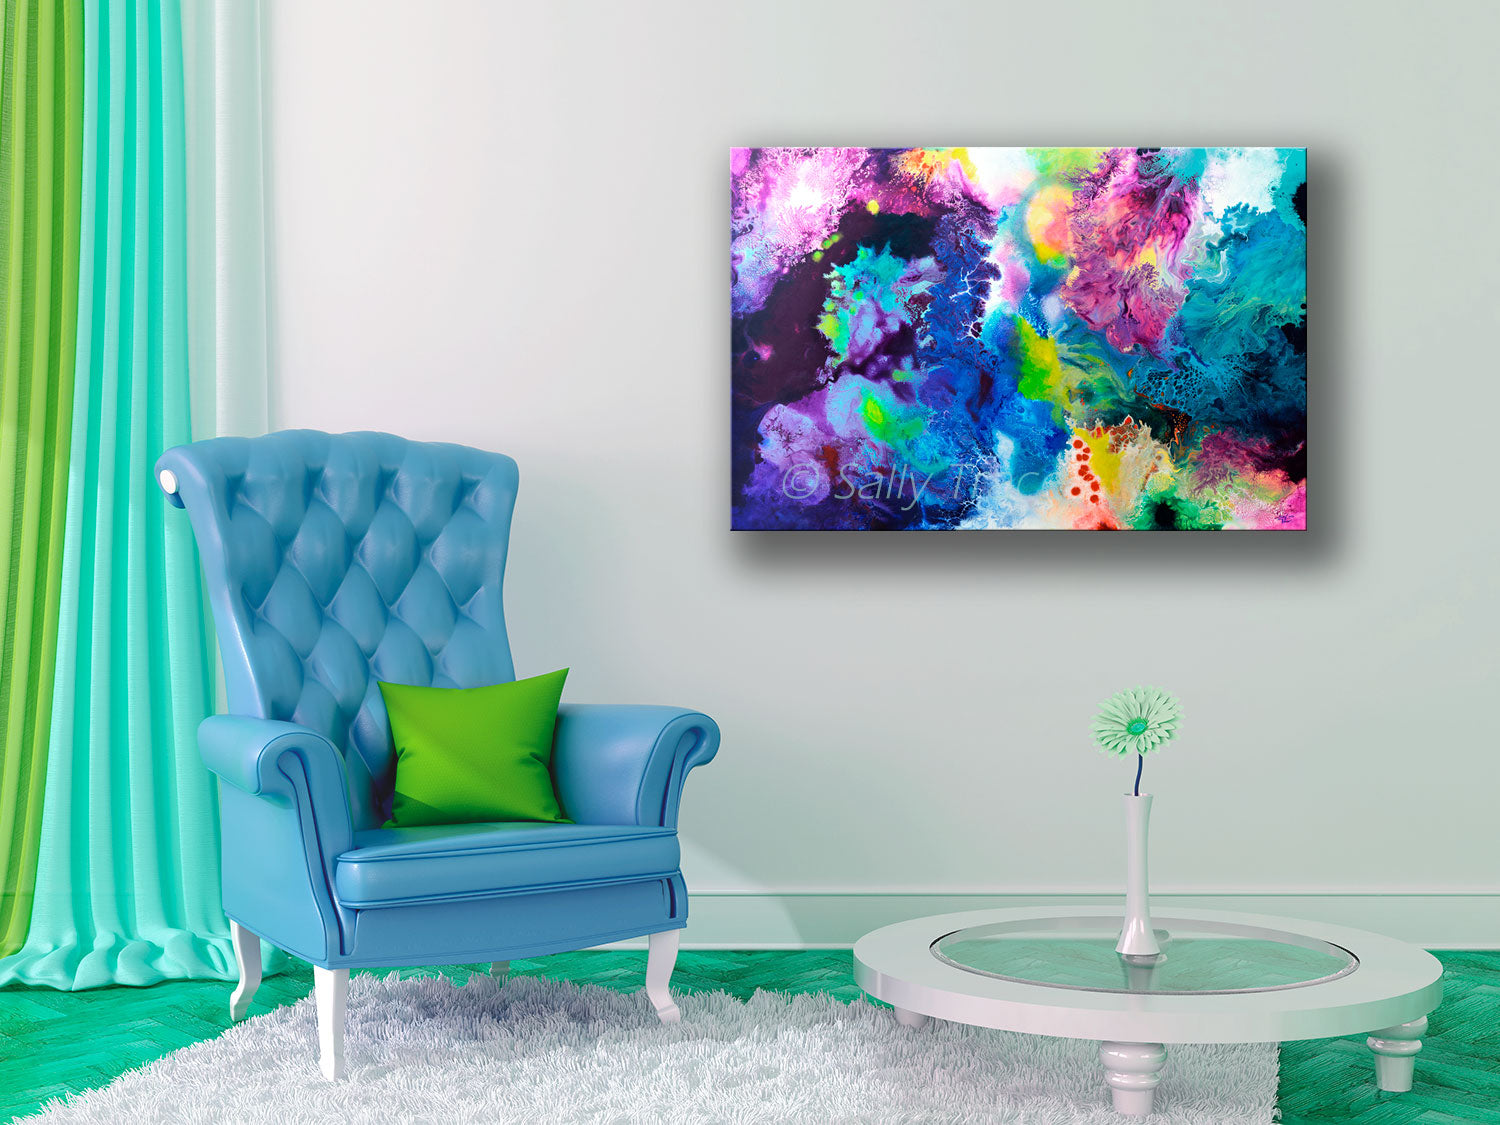 New Life, abstract art painting prints on sale from Sally Trace, room view